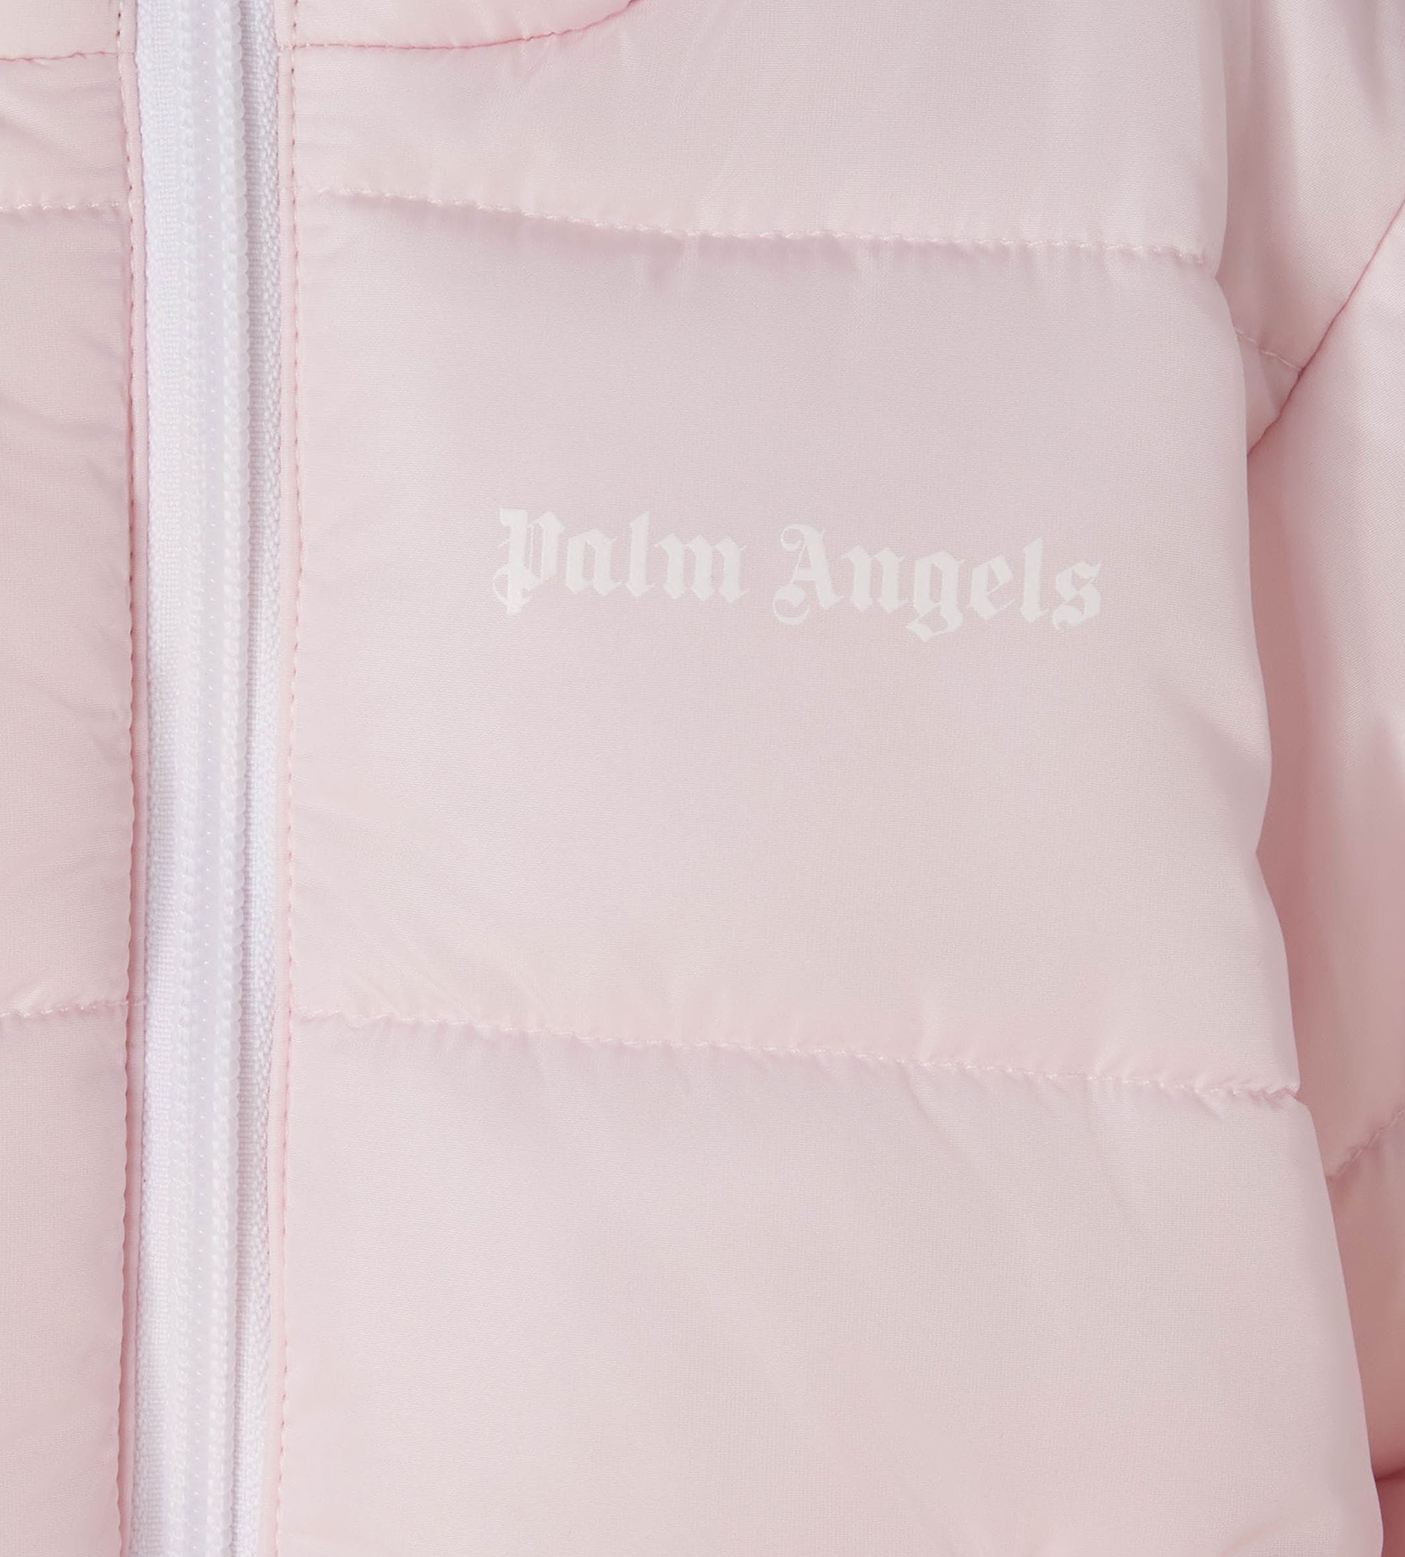 Logo-Print Quilted Hooded Jacket Pink